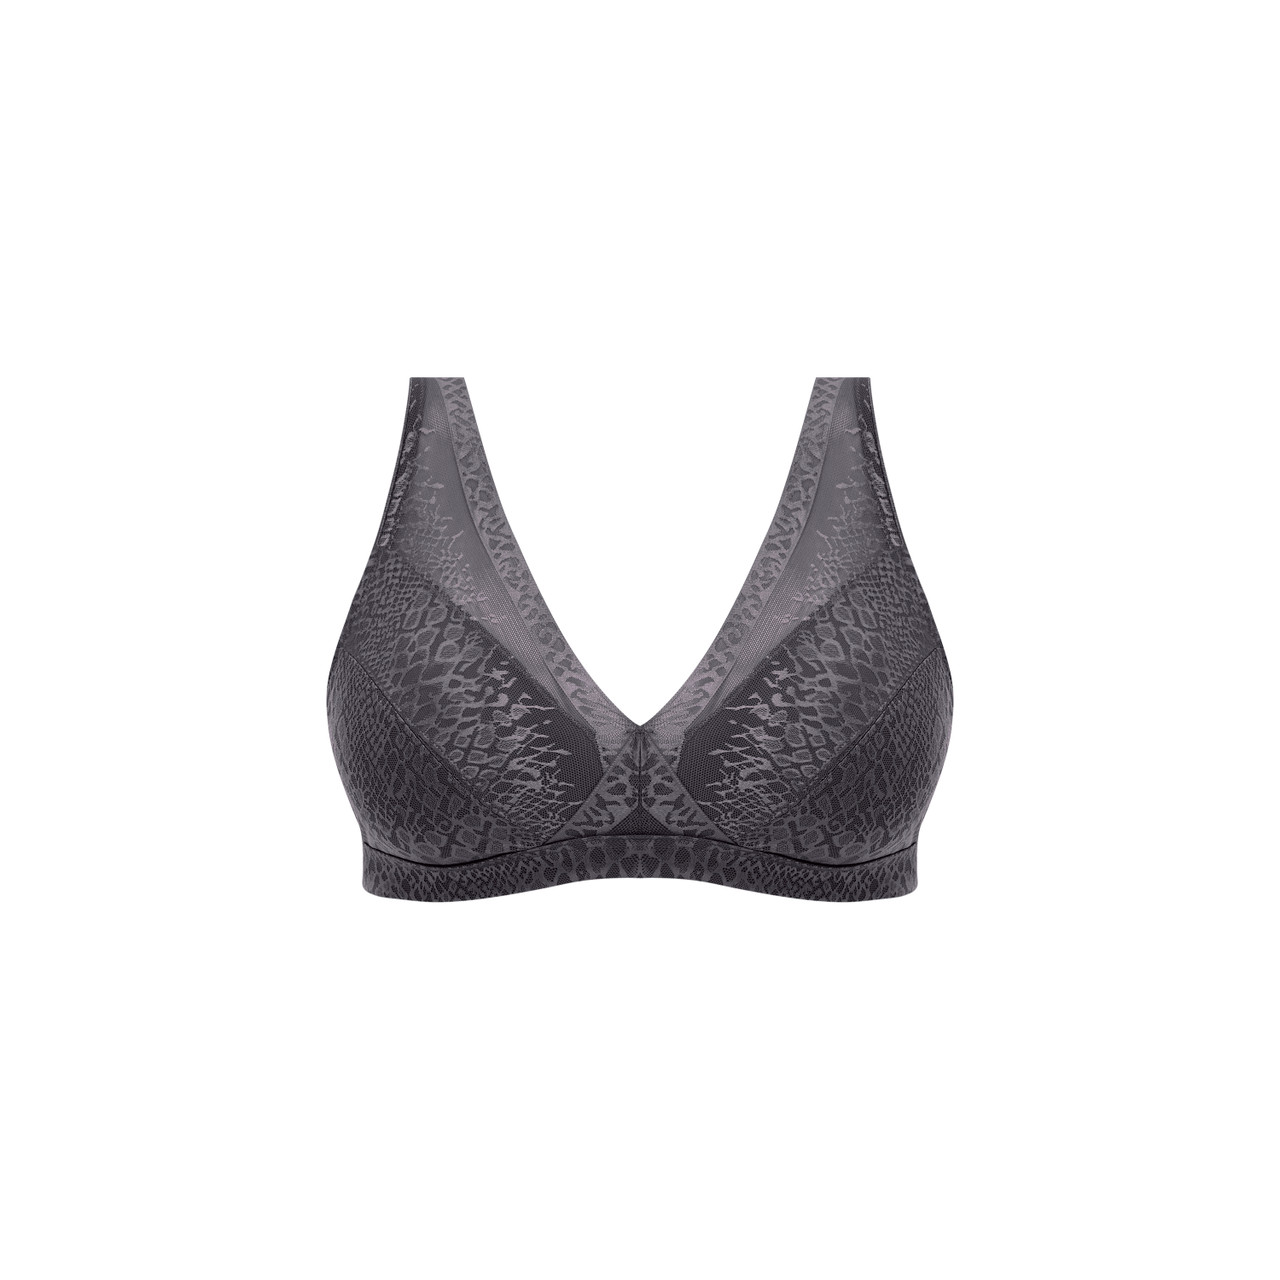 Fabstieve Black Stretchable Non-Padded Bra